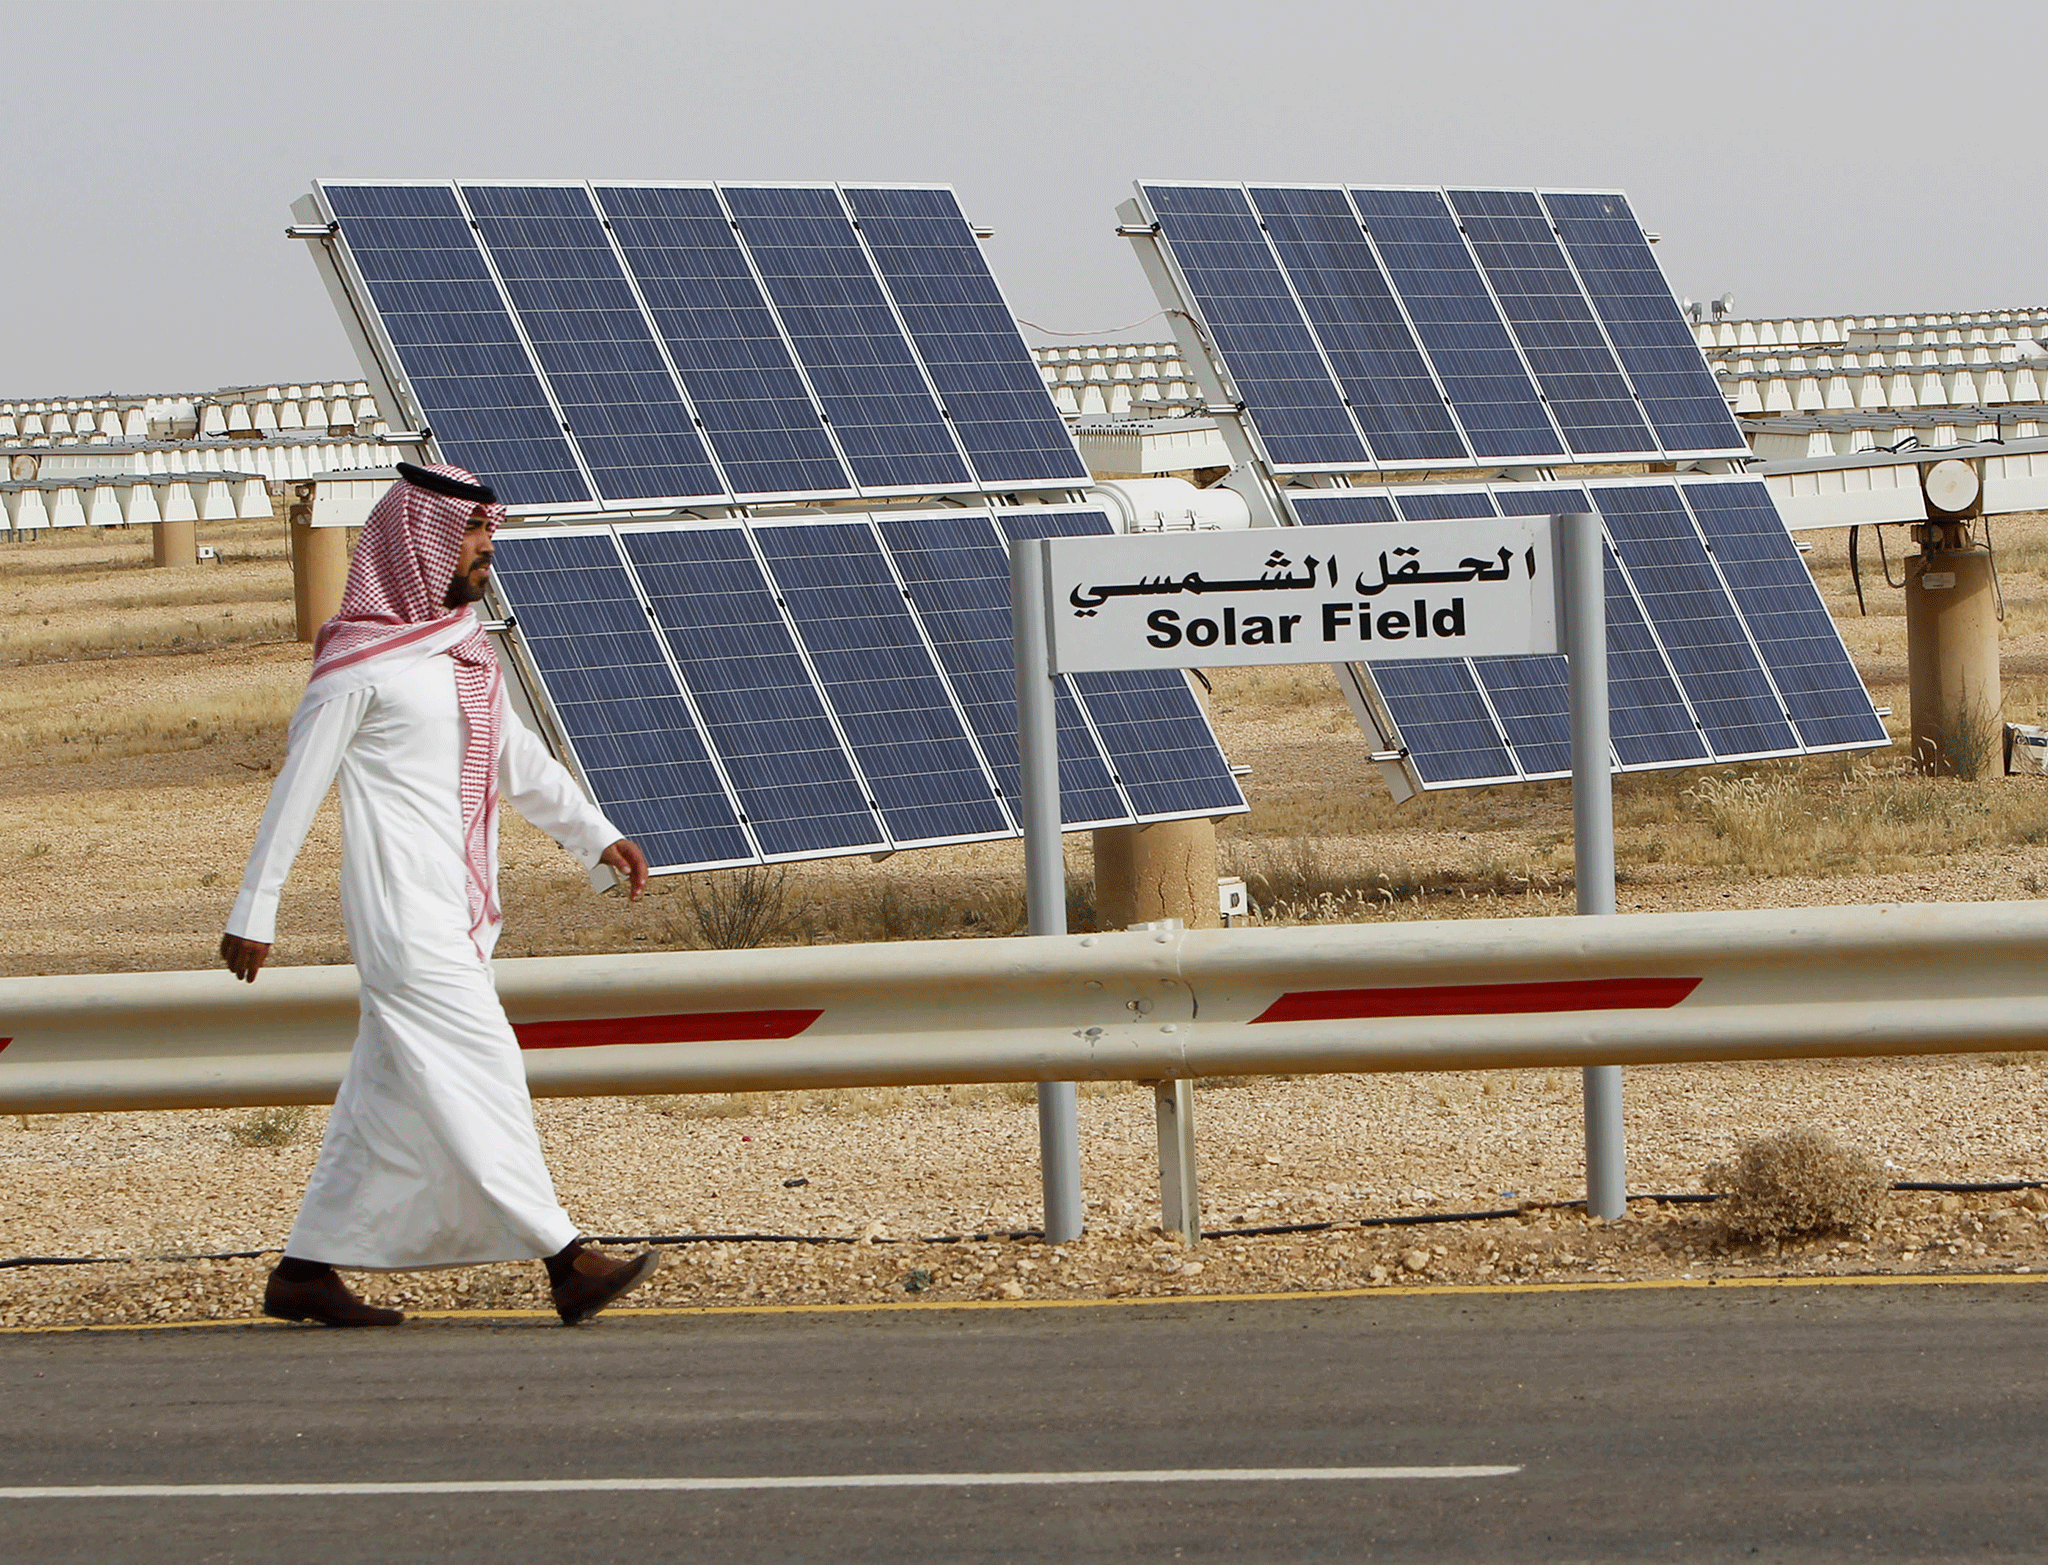 A man walks past a field of solar panels at the King Abdulaziz City of Sciences and Technology